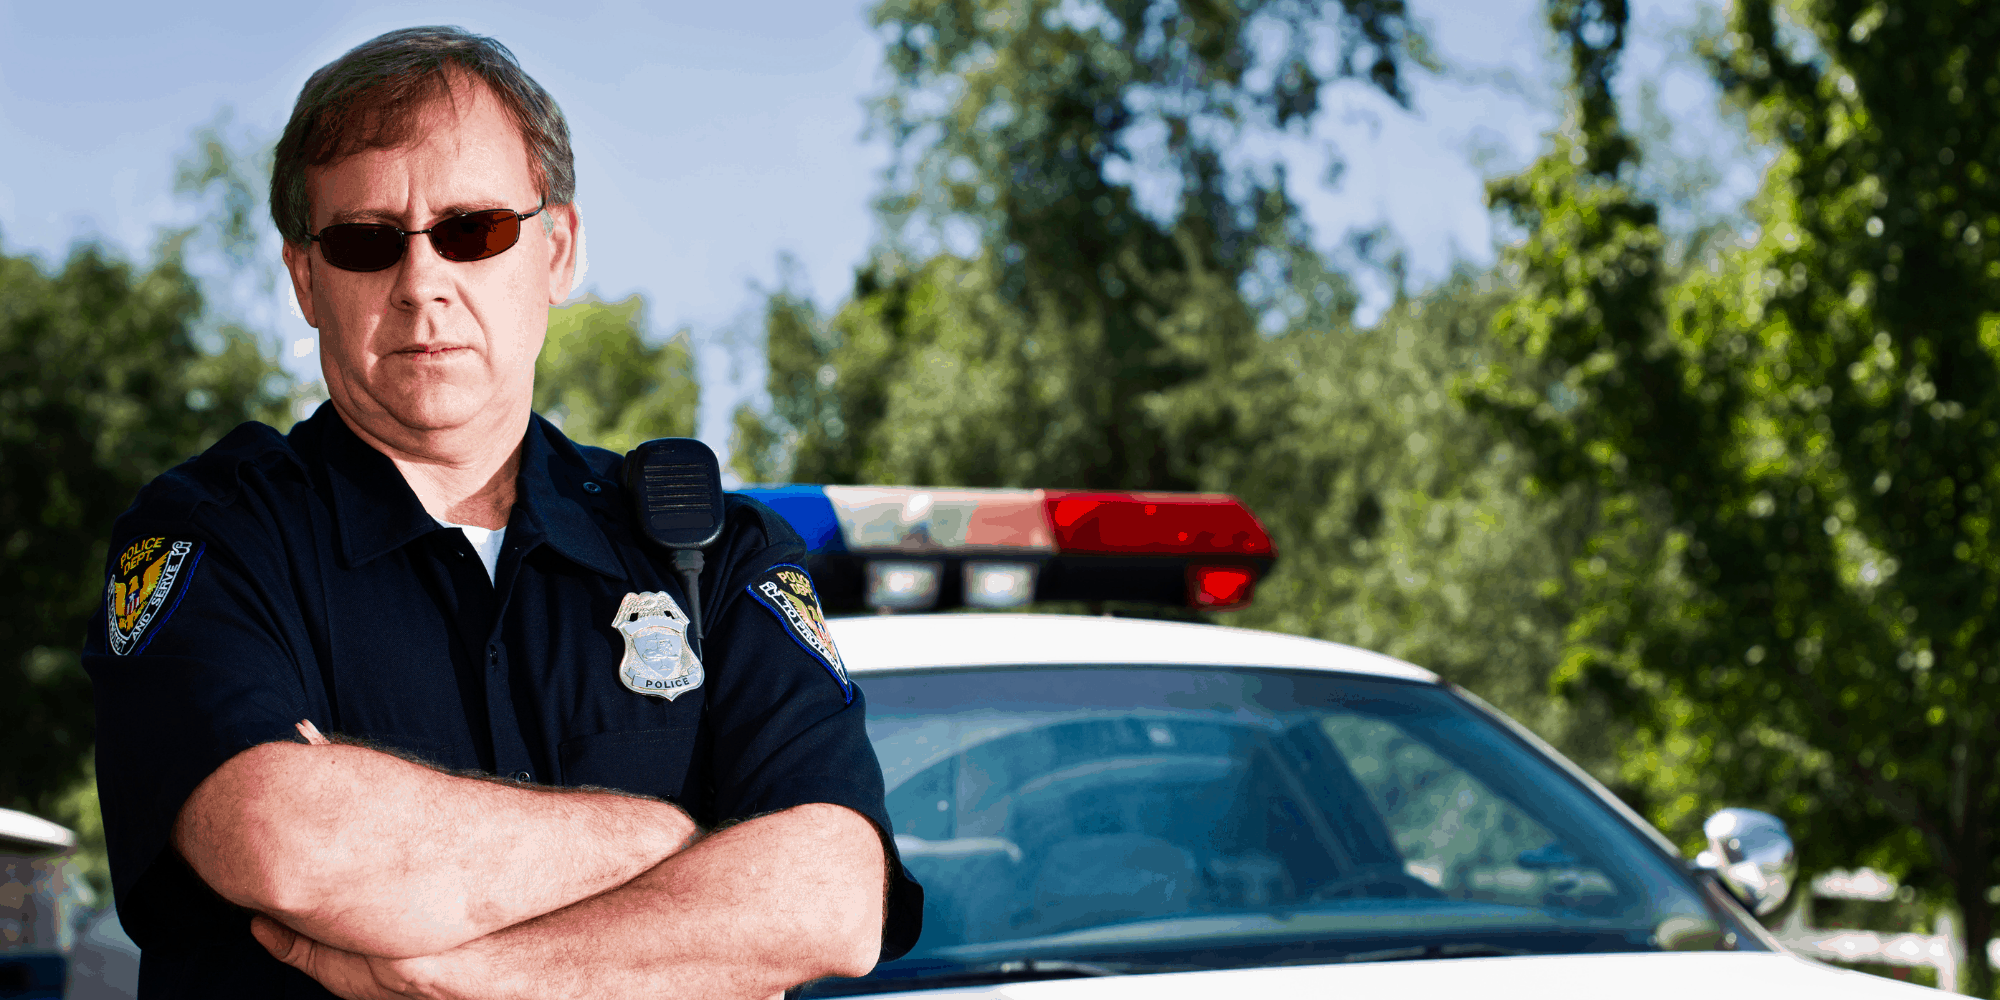 25+ Best Gifts for Police Officers to Thank Them for Their Service